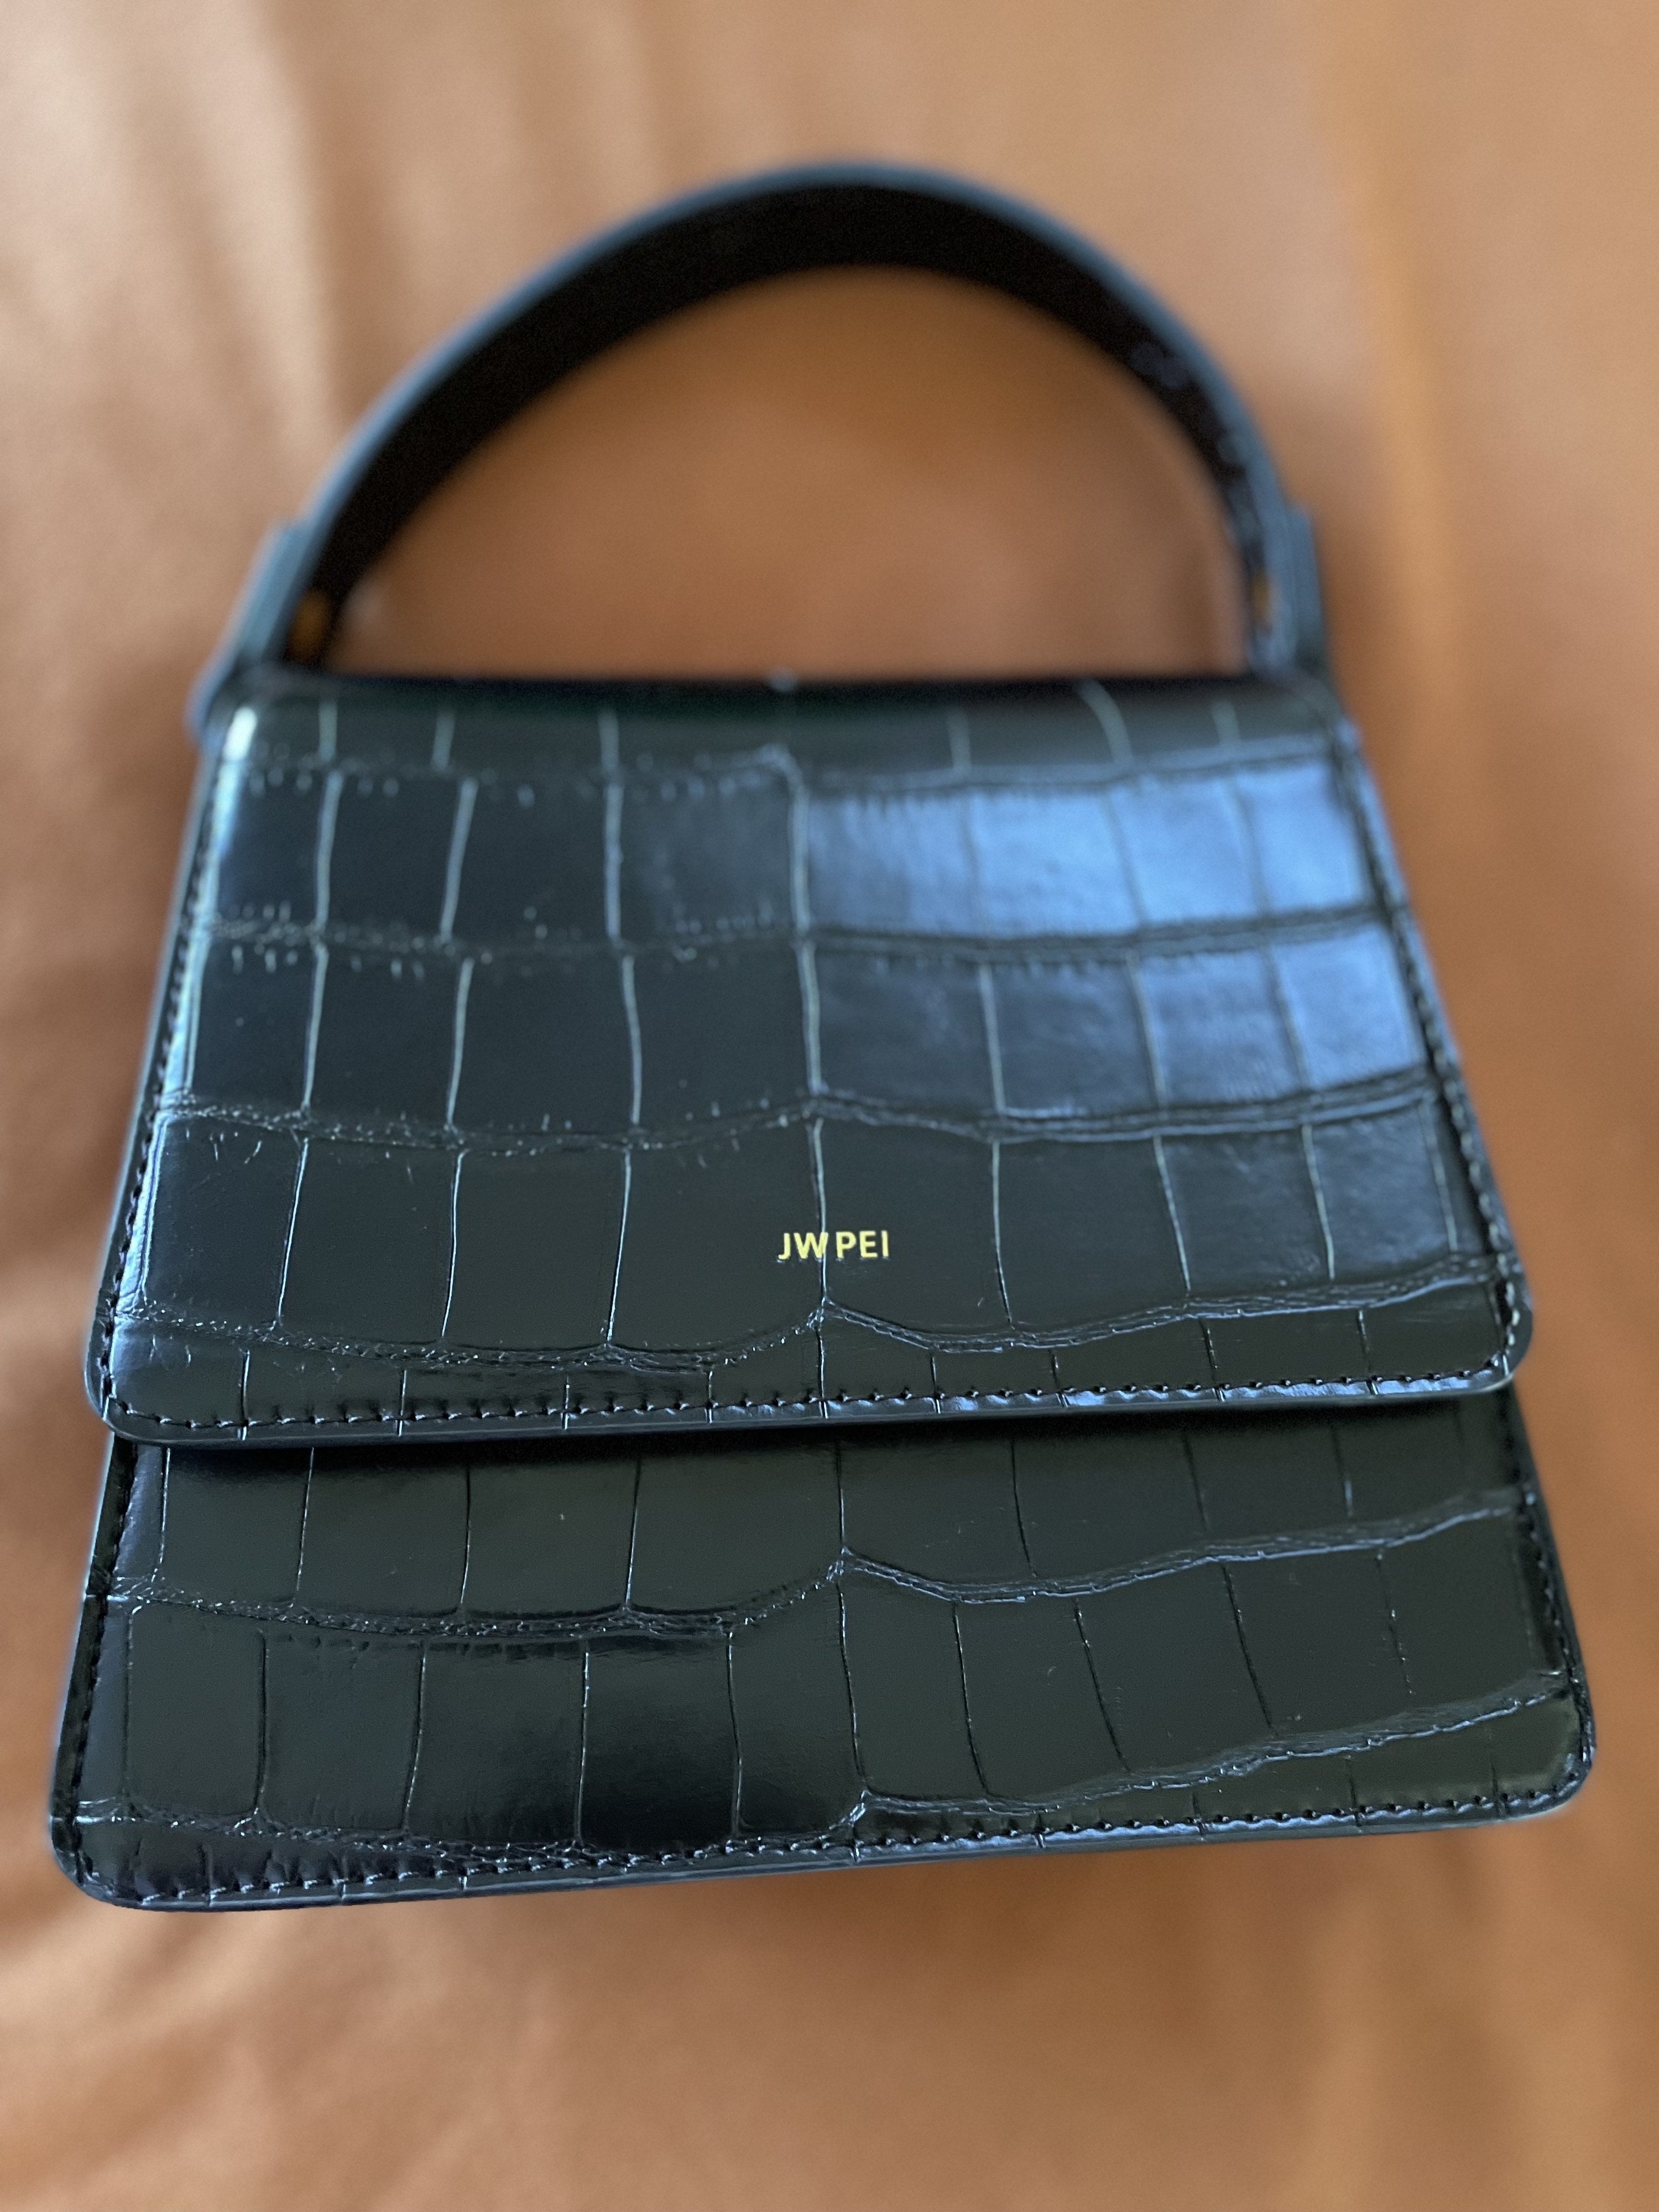 The @JW PEI handbags are affordable for their quality. I've been weari